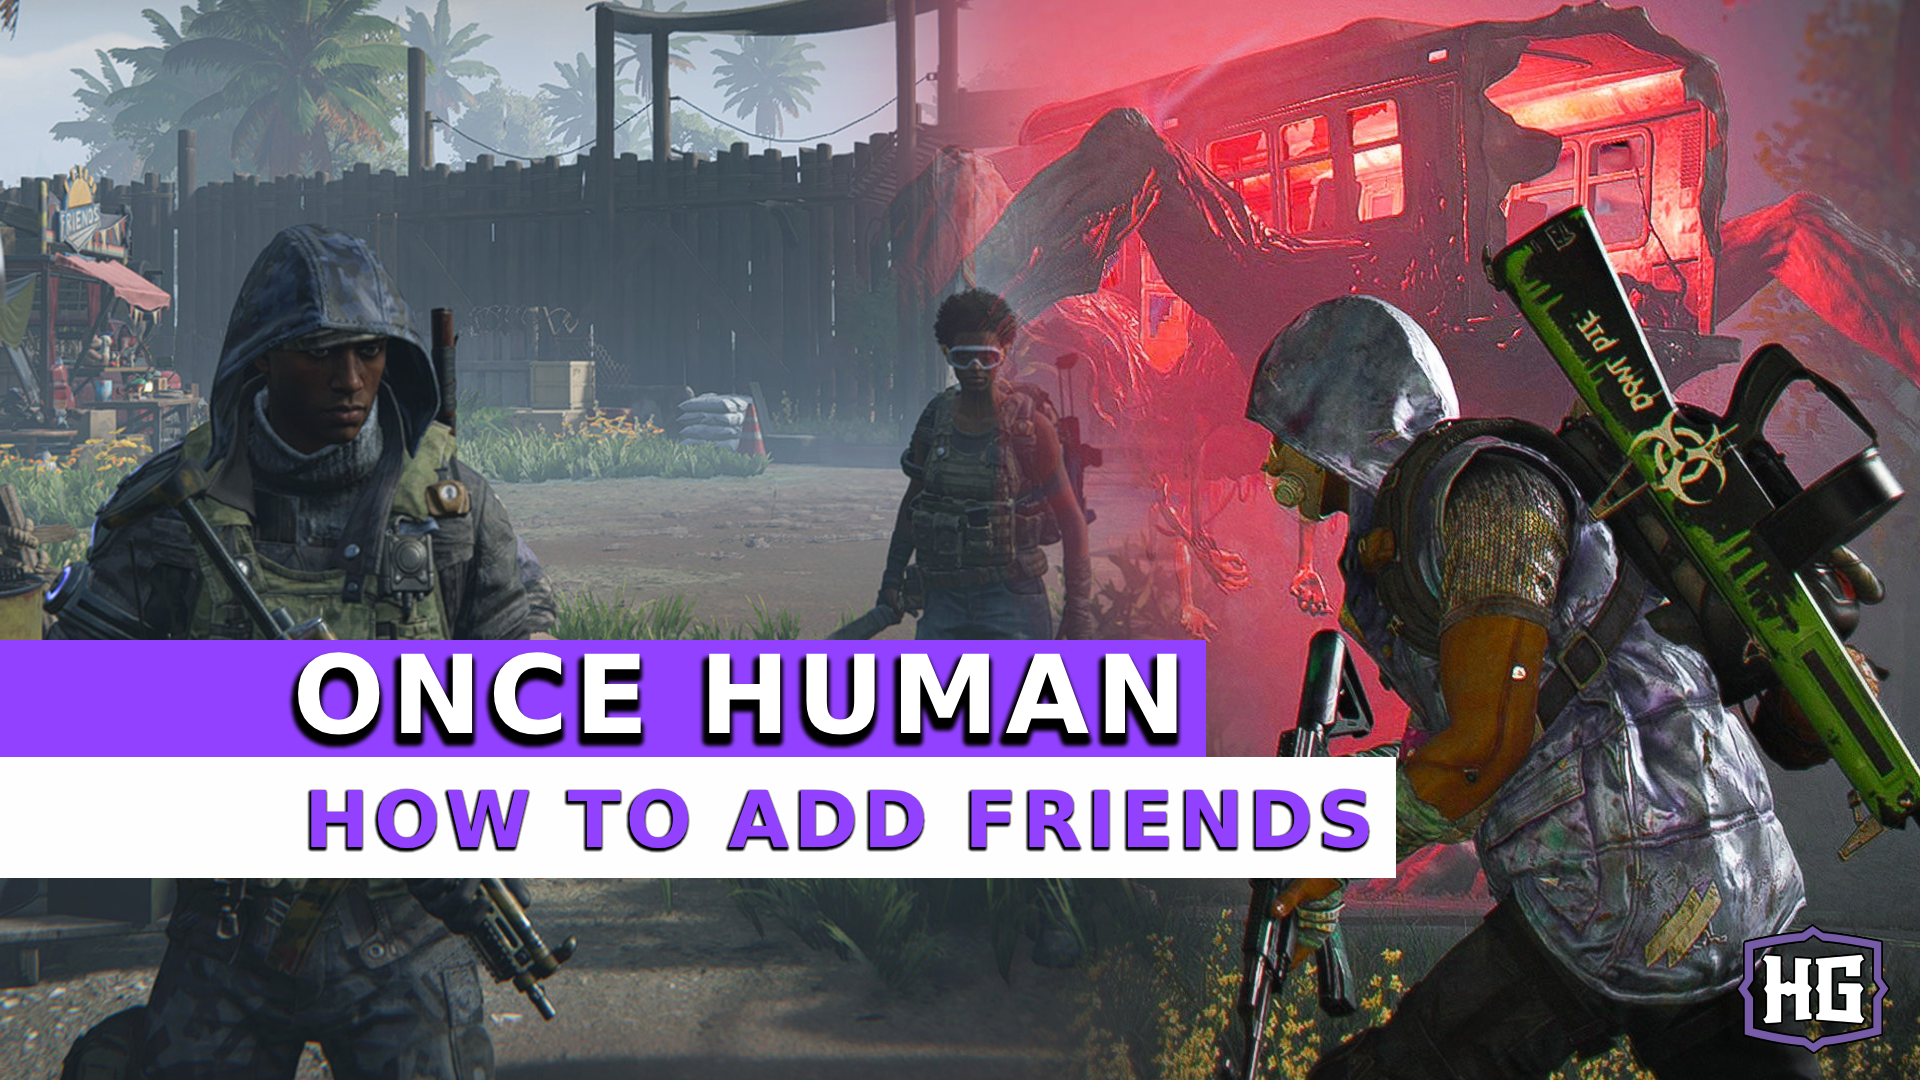 Once Human: How To Add Friends